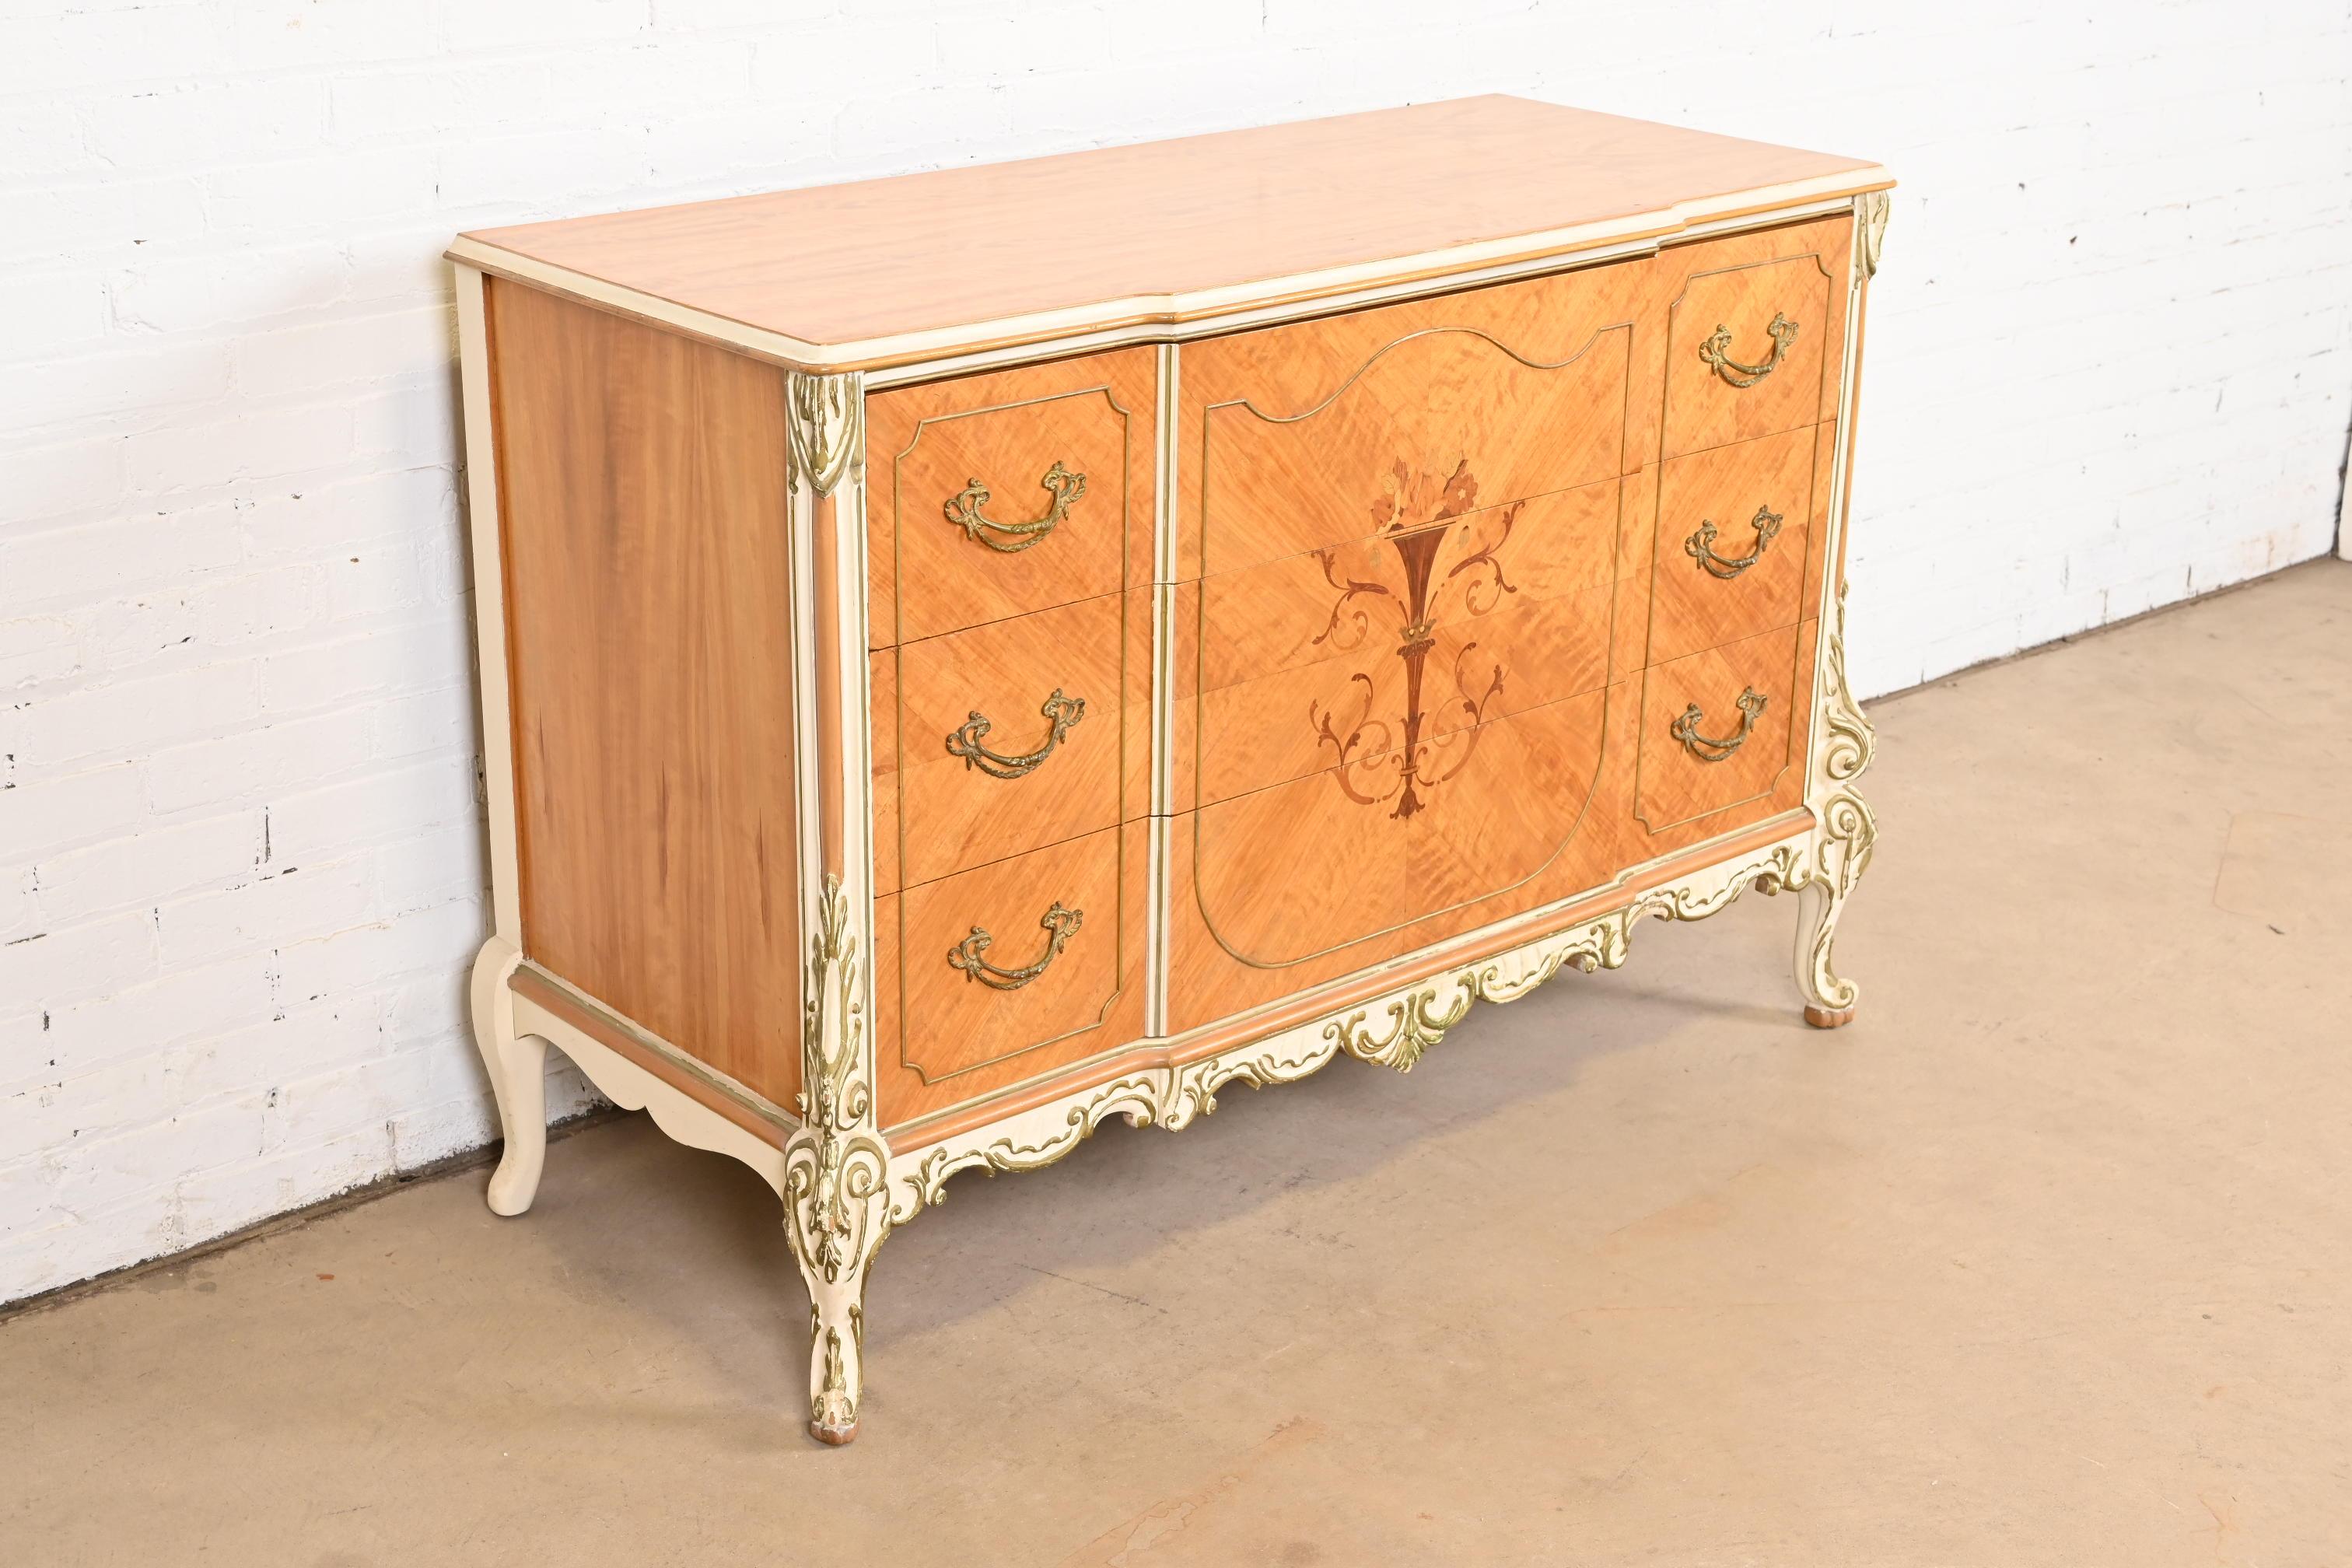 Brass Romweber French Rococo Satinwood Inlaid Marquetry Parcel Painted Dresser, 1930s For Sale